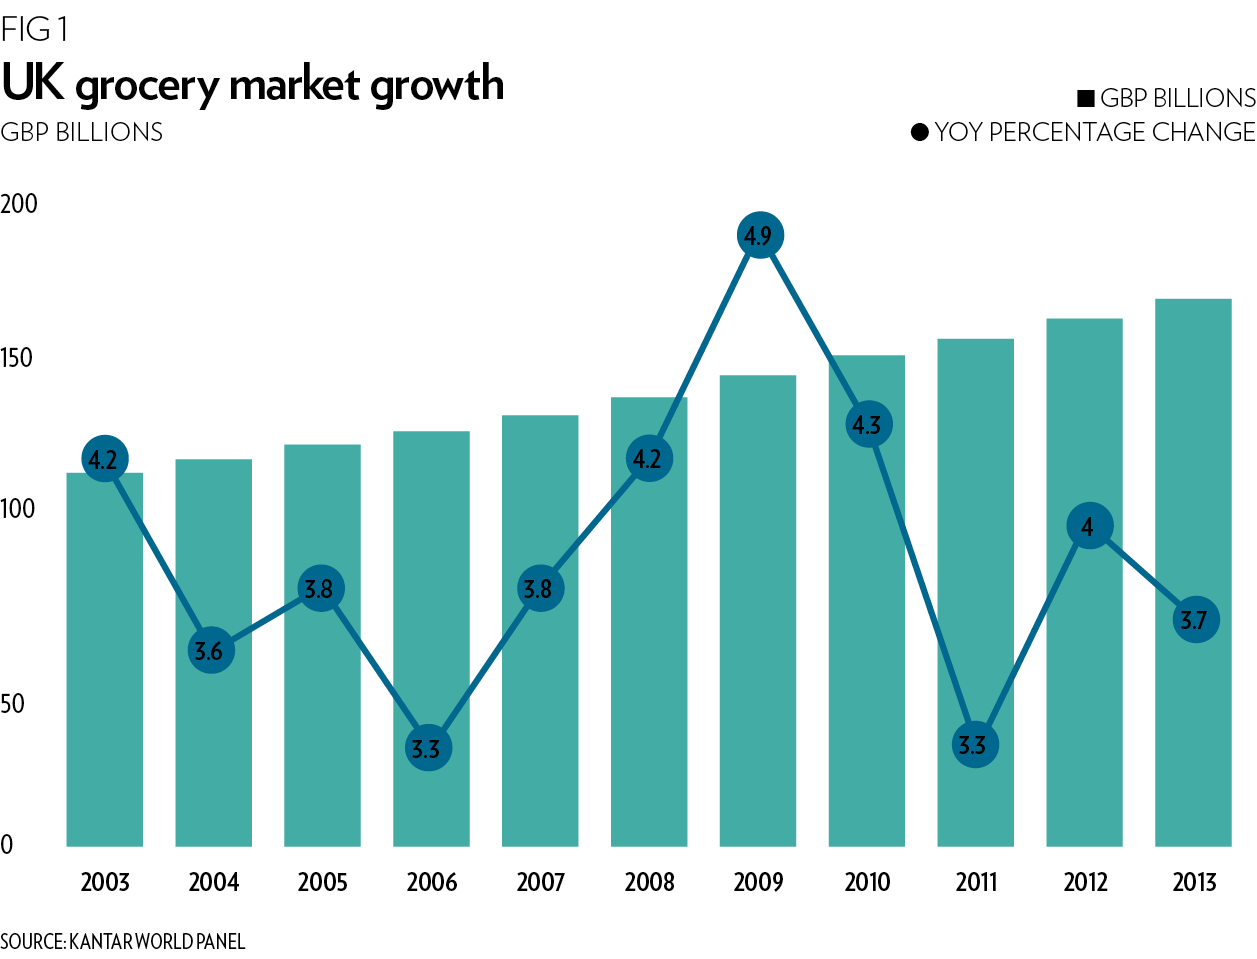 UK grocery market growth